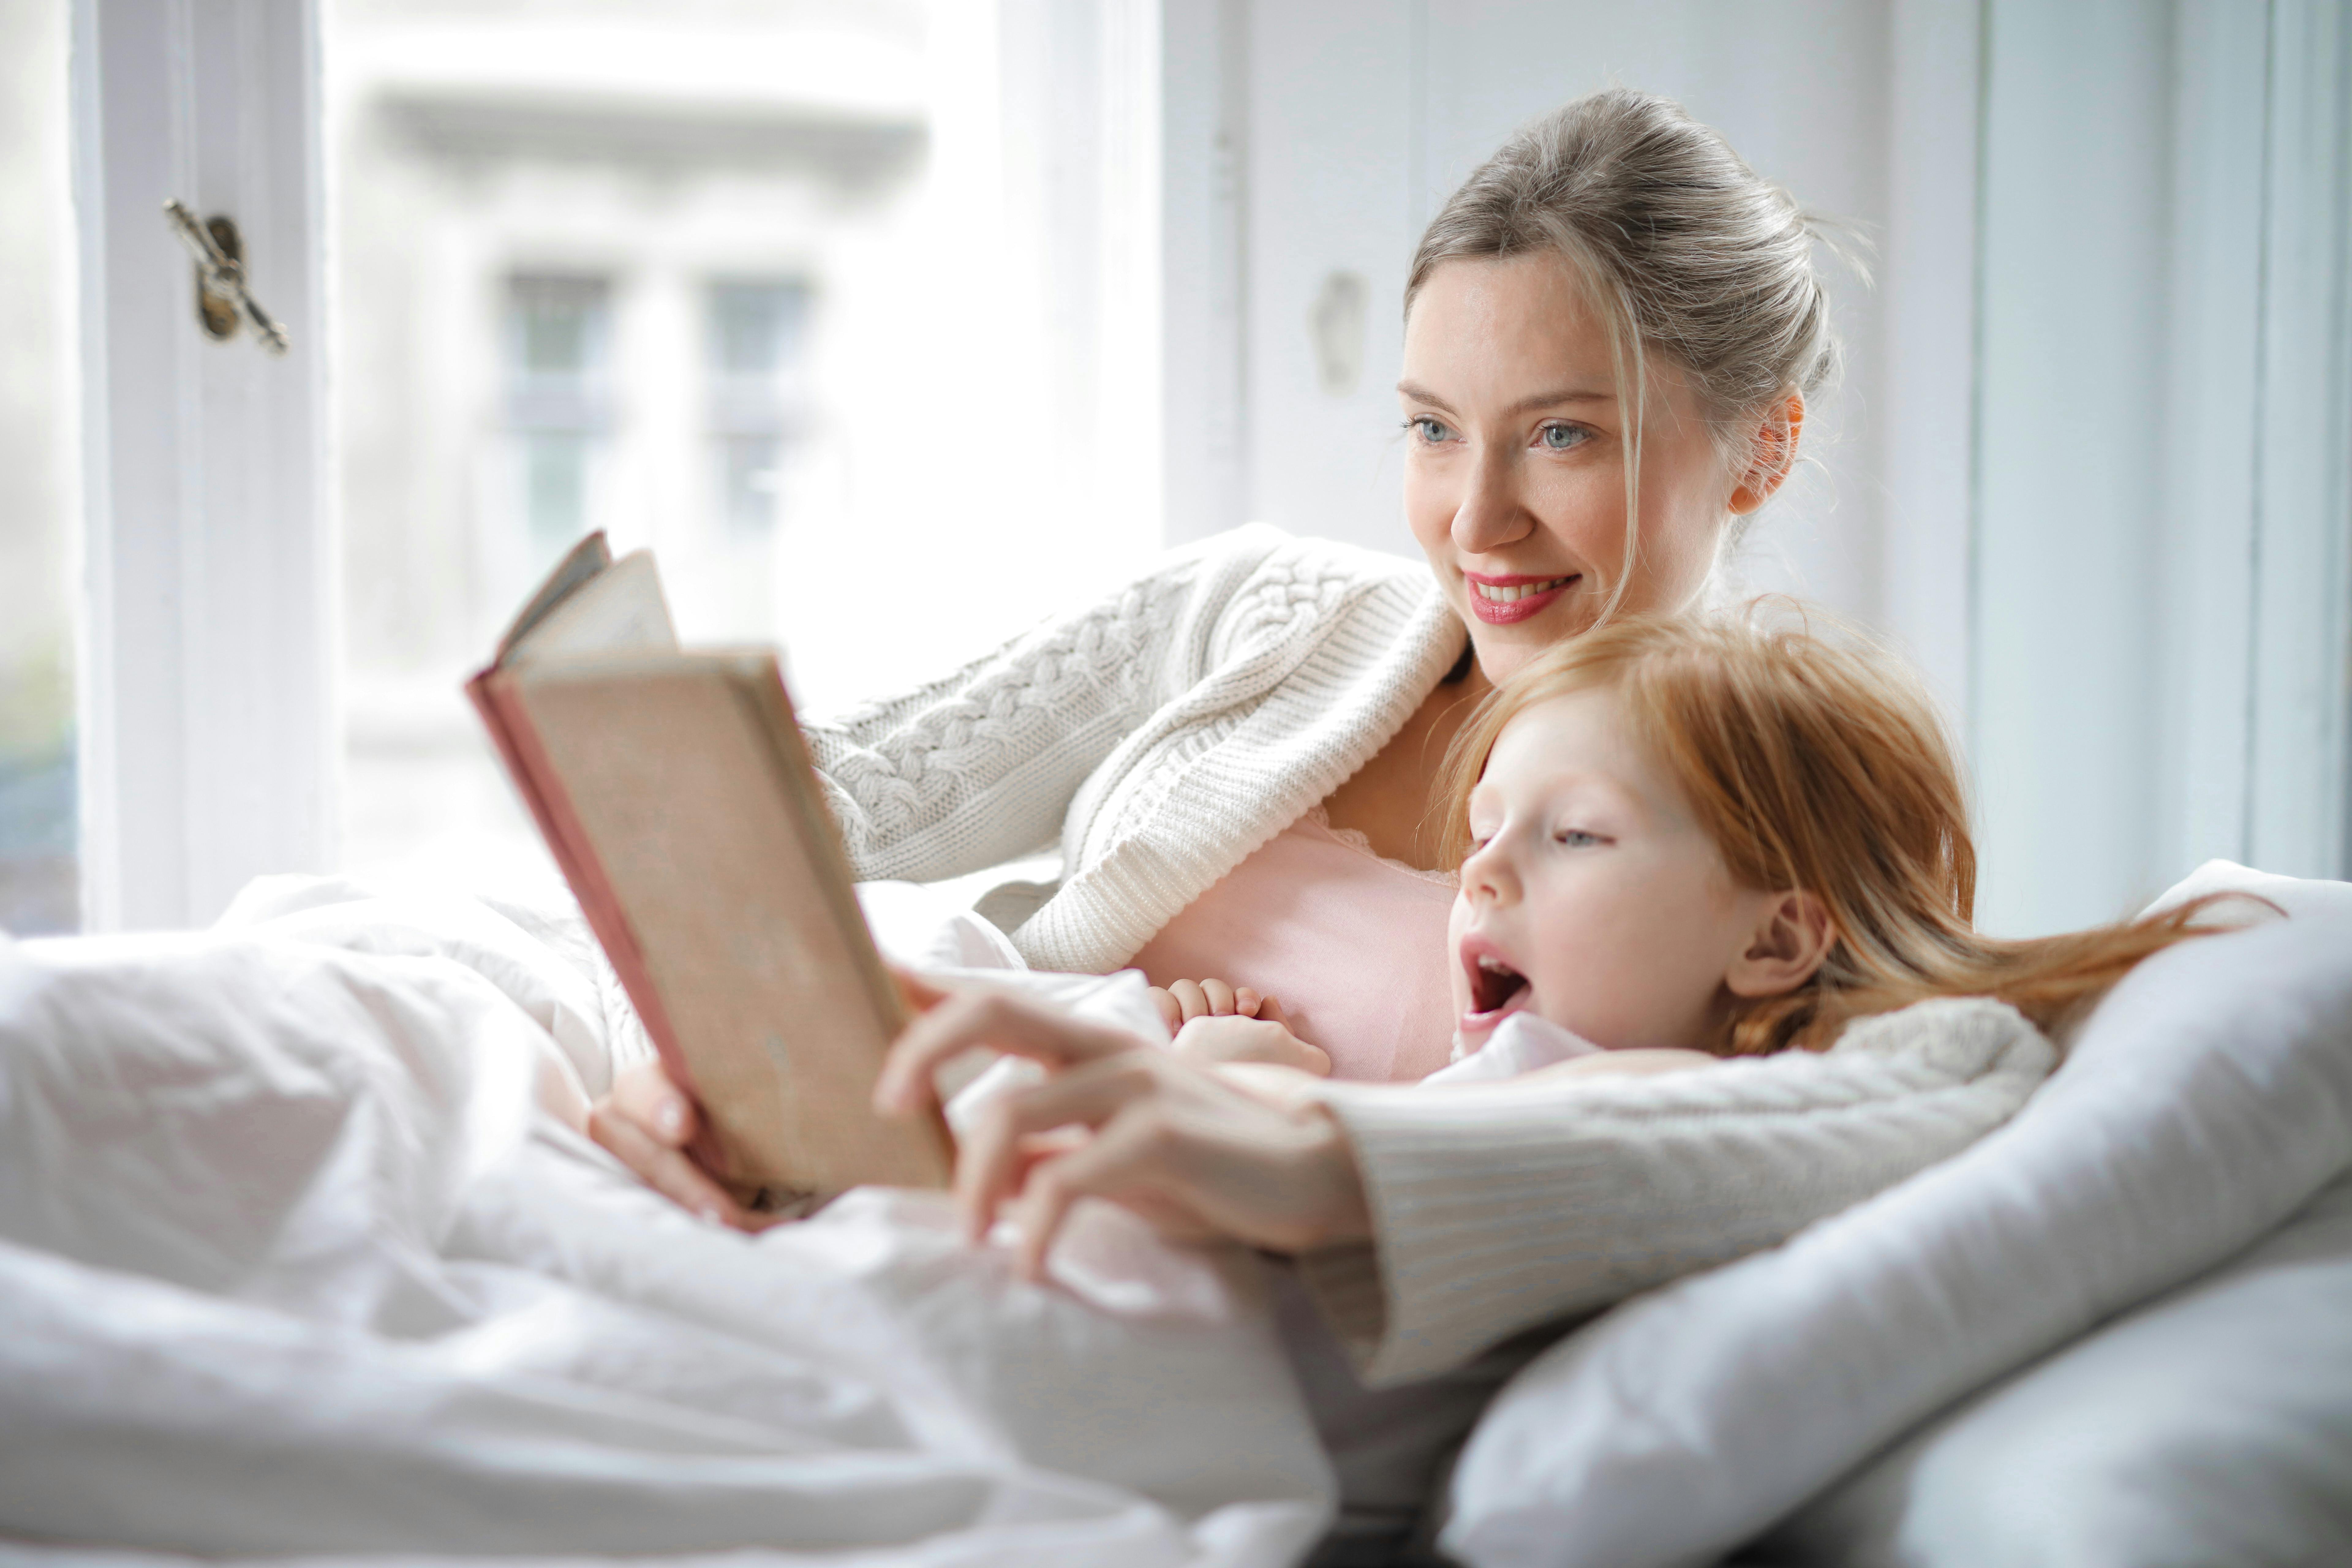 A happy woman and daughter reading a story | Source: Pexels